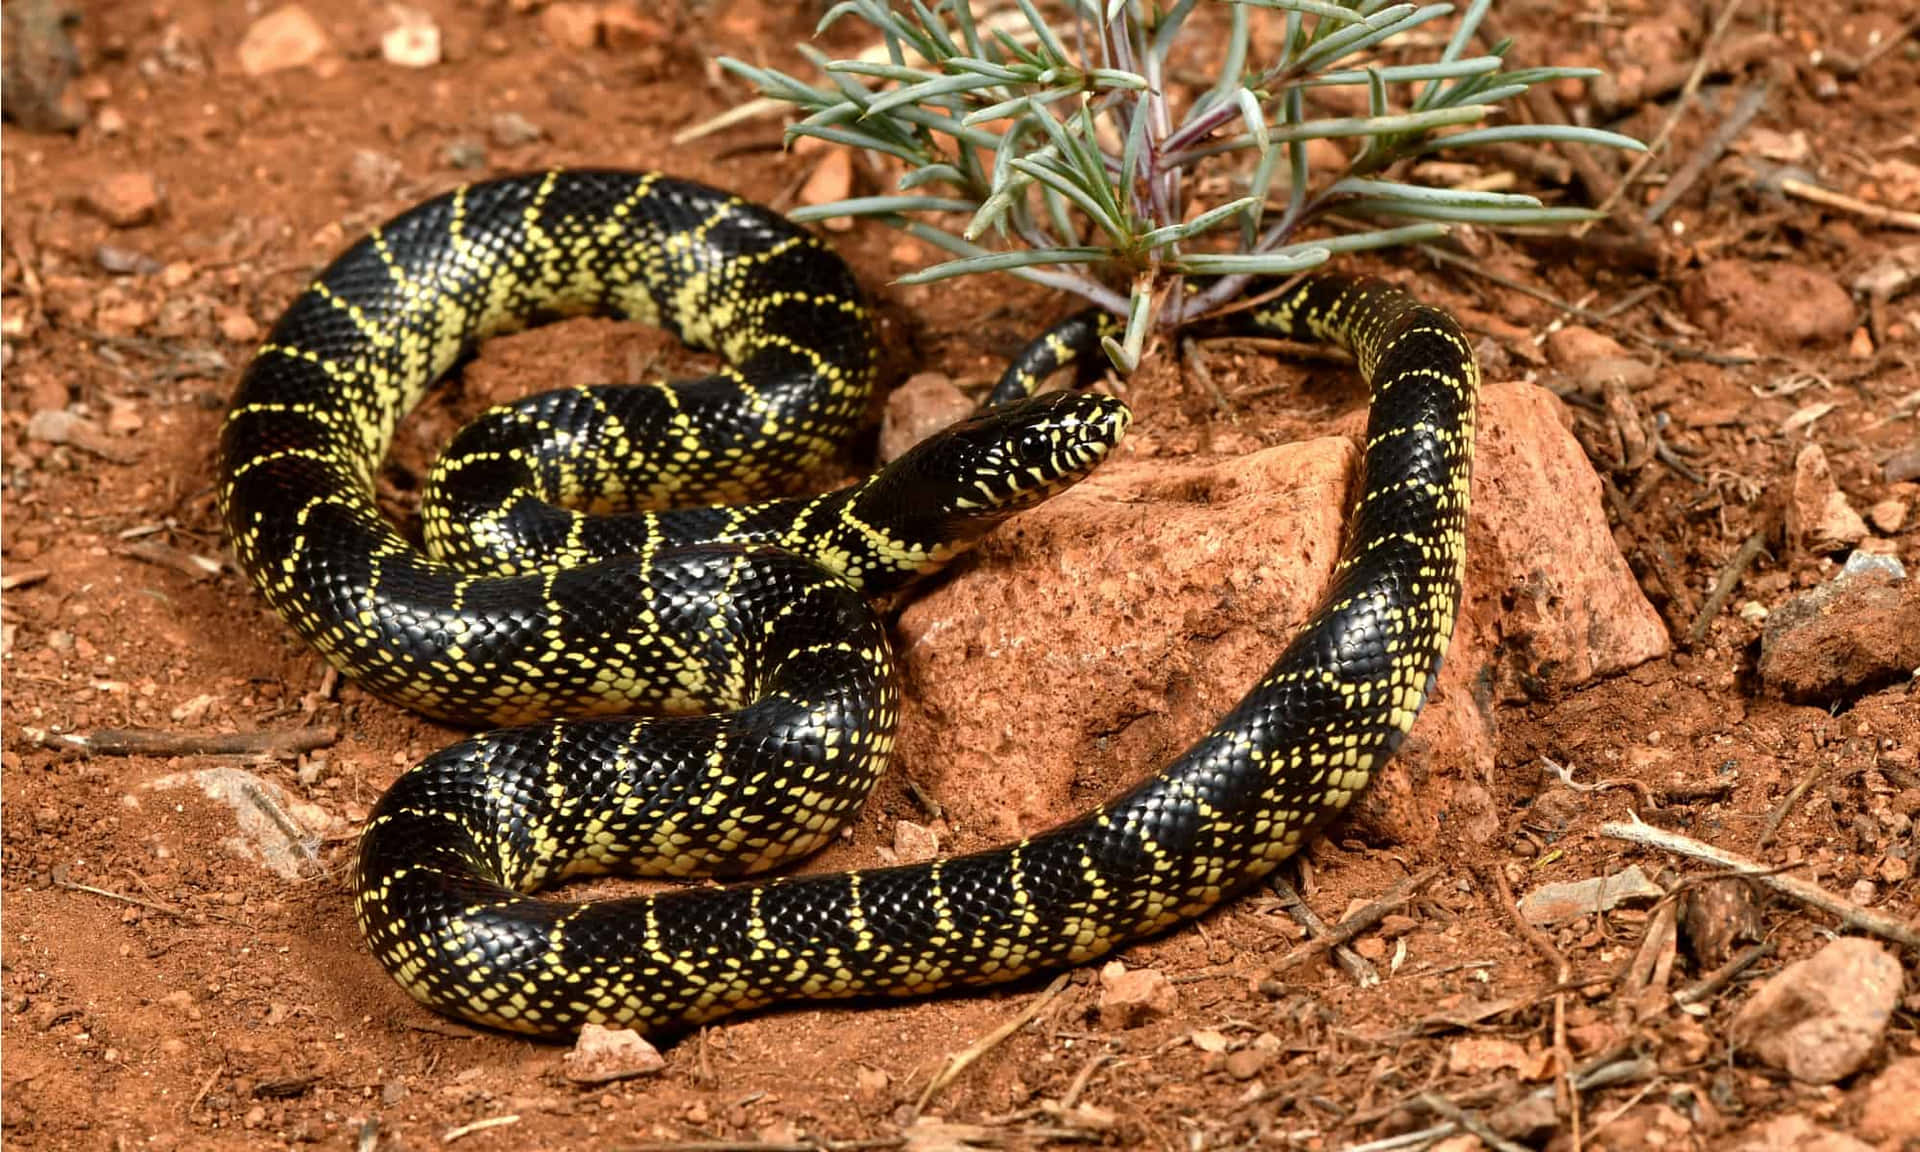 A Black And Yellow Snake Is Sitting On A Rock